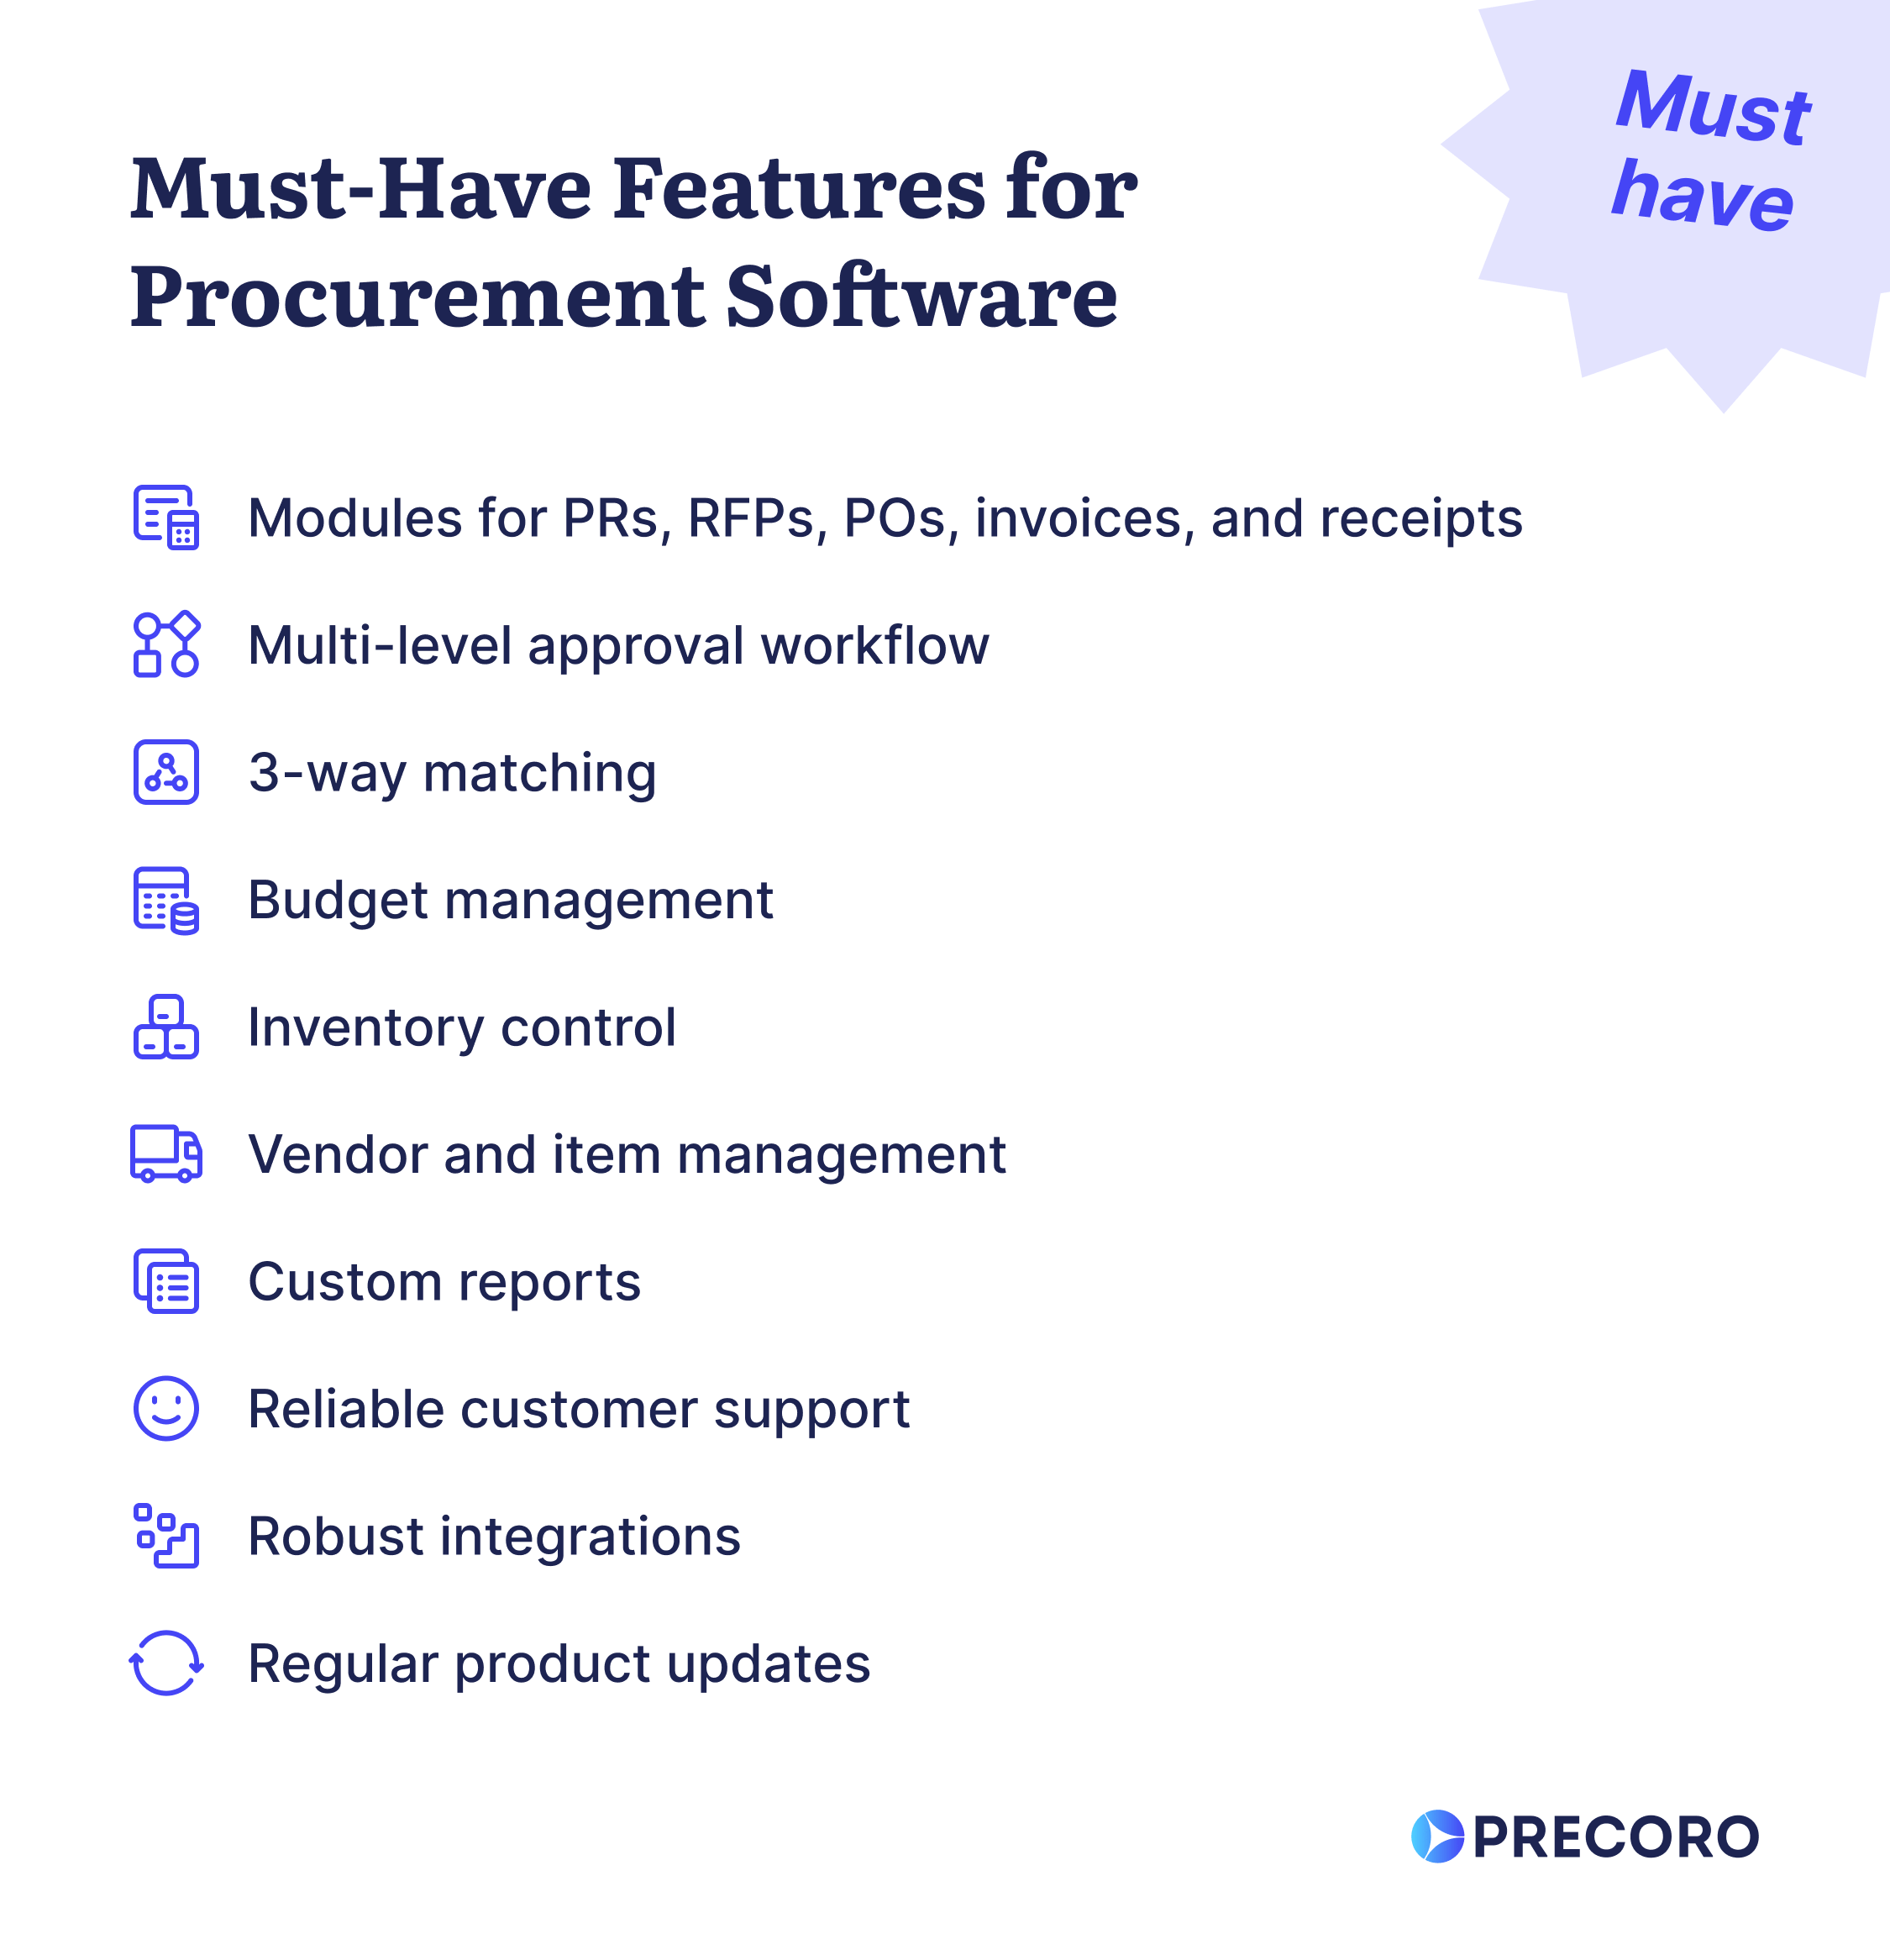 must-have features for procurement software